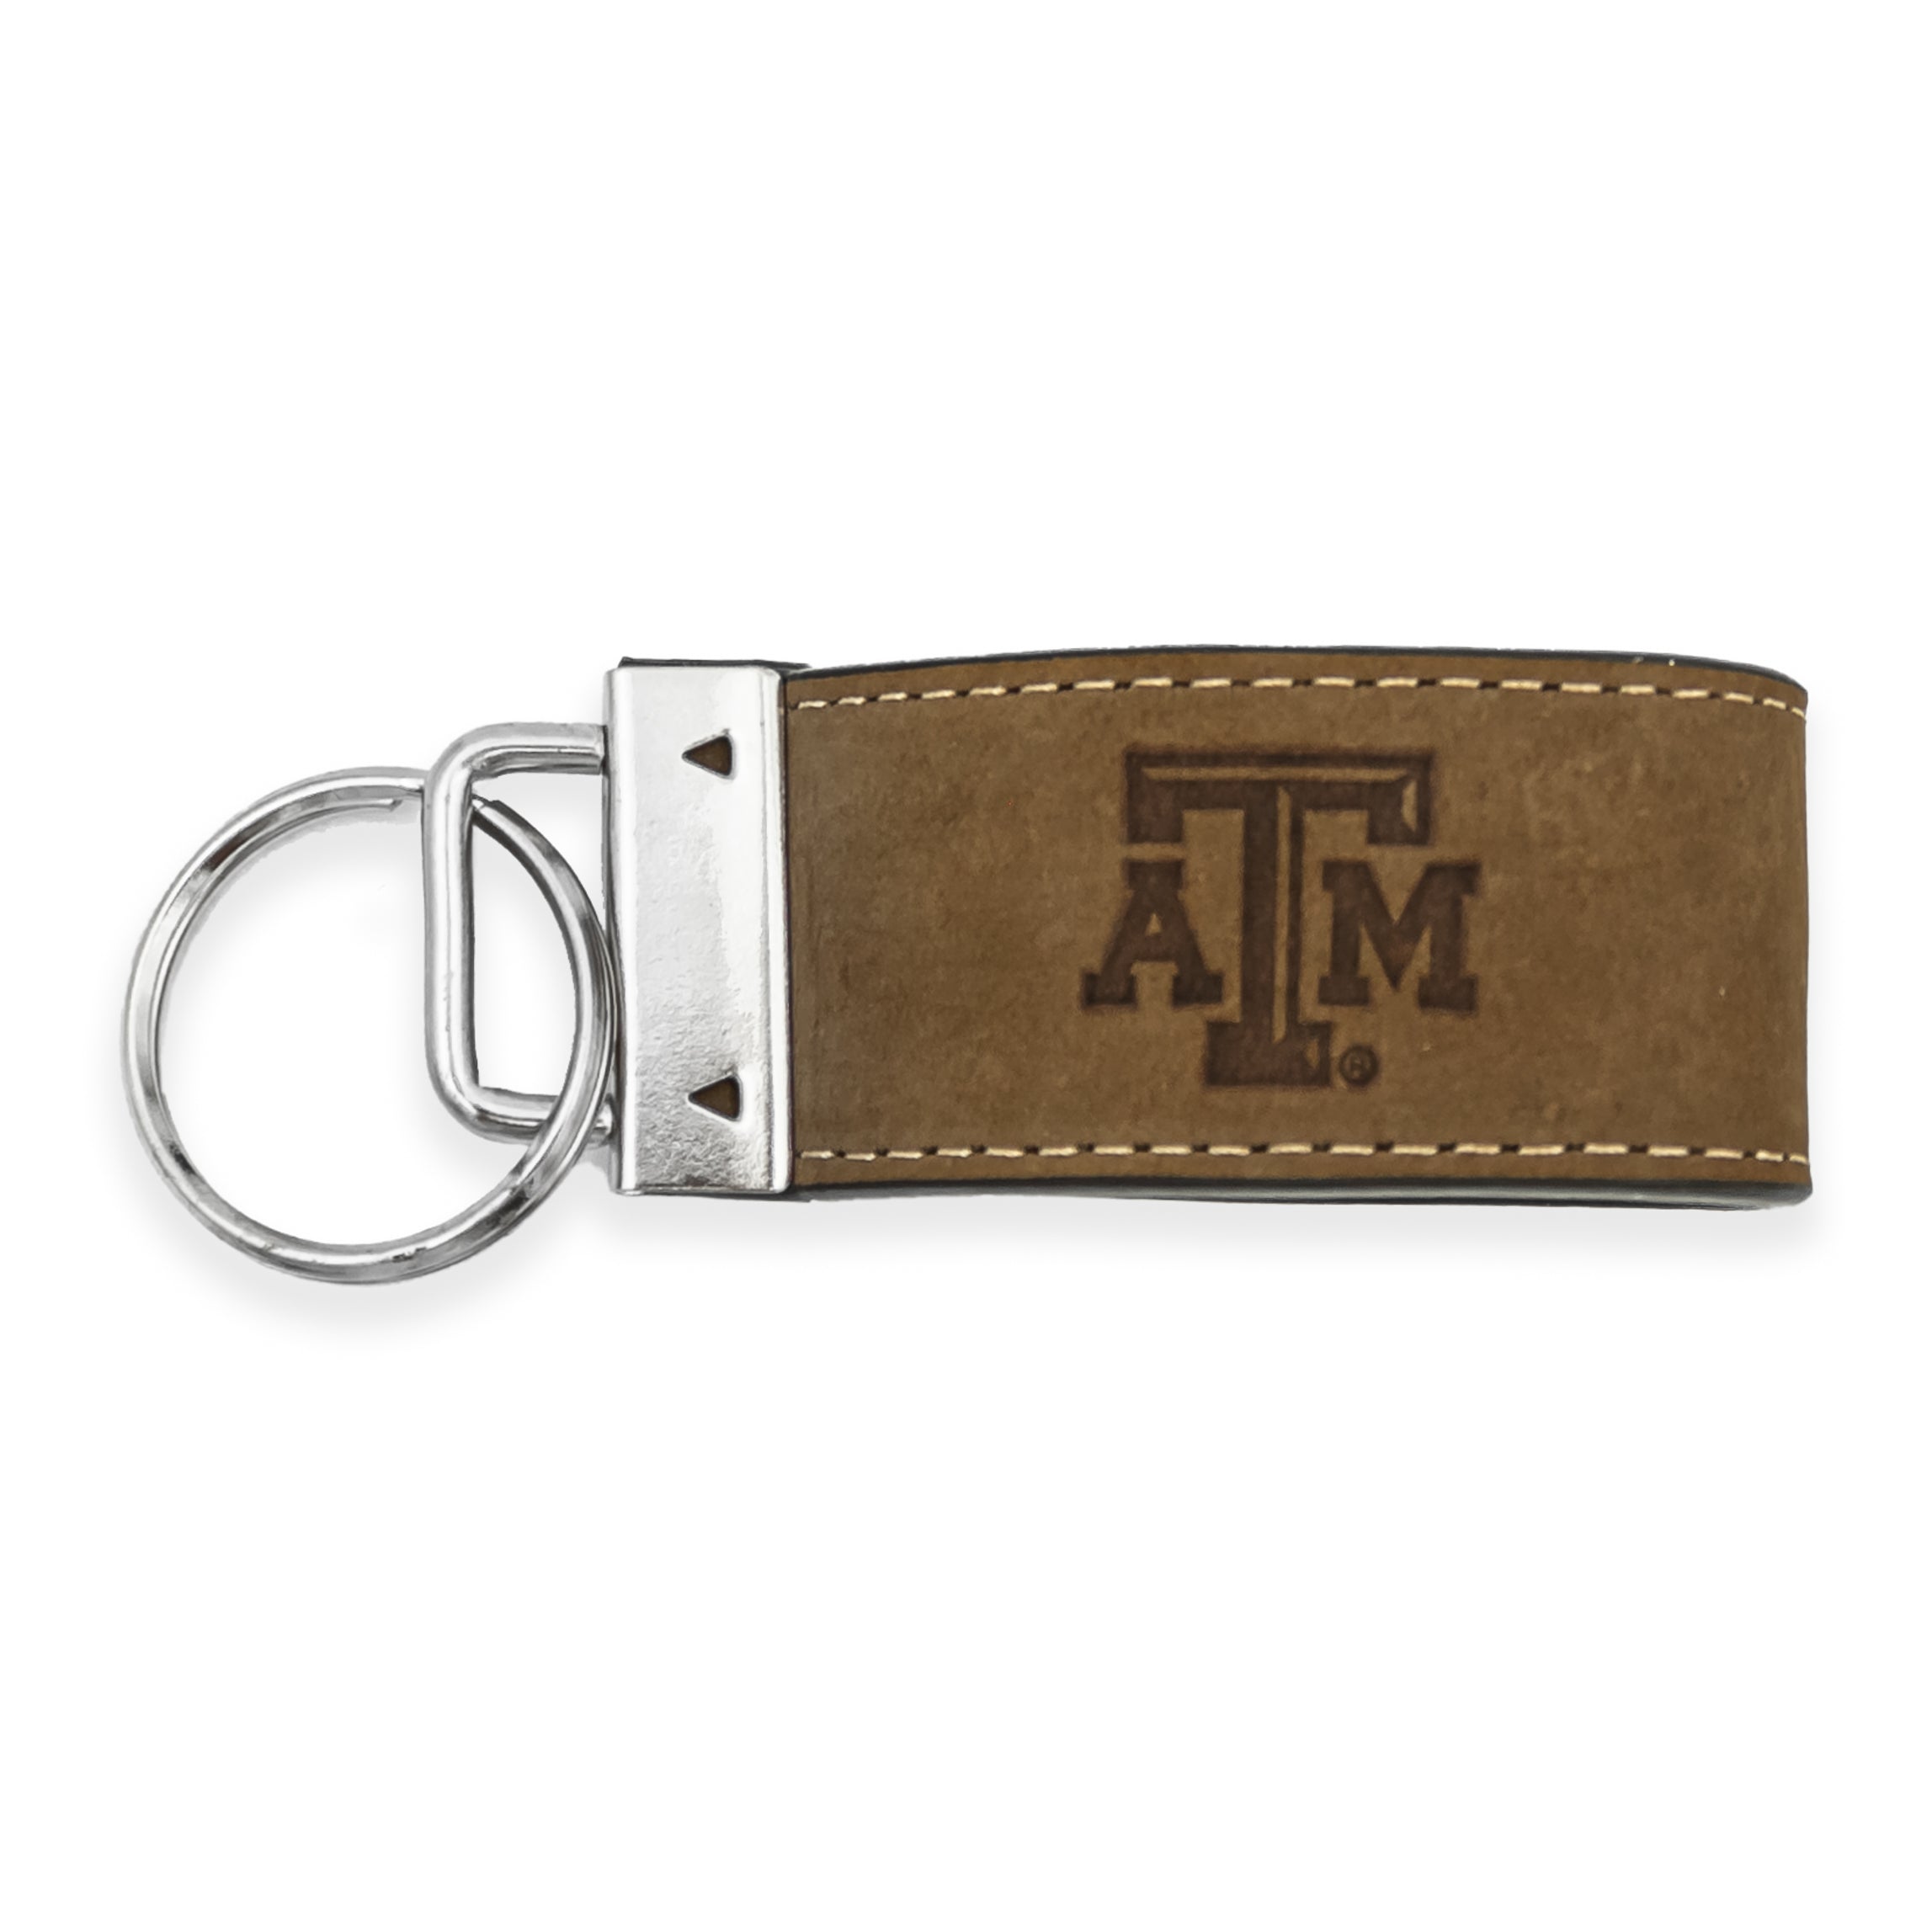 Zepplin Products Texas A&M Leather Key Chain